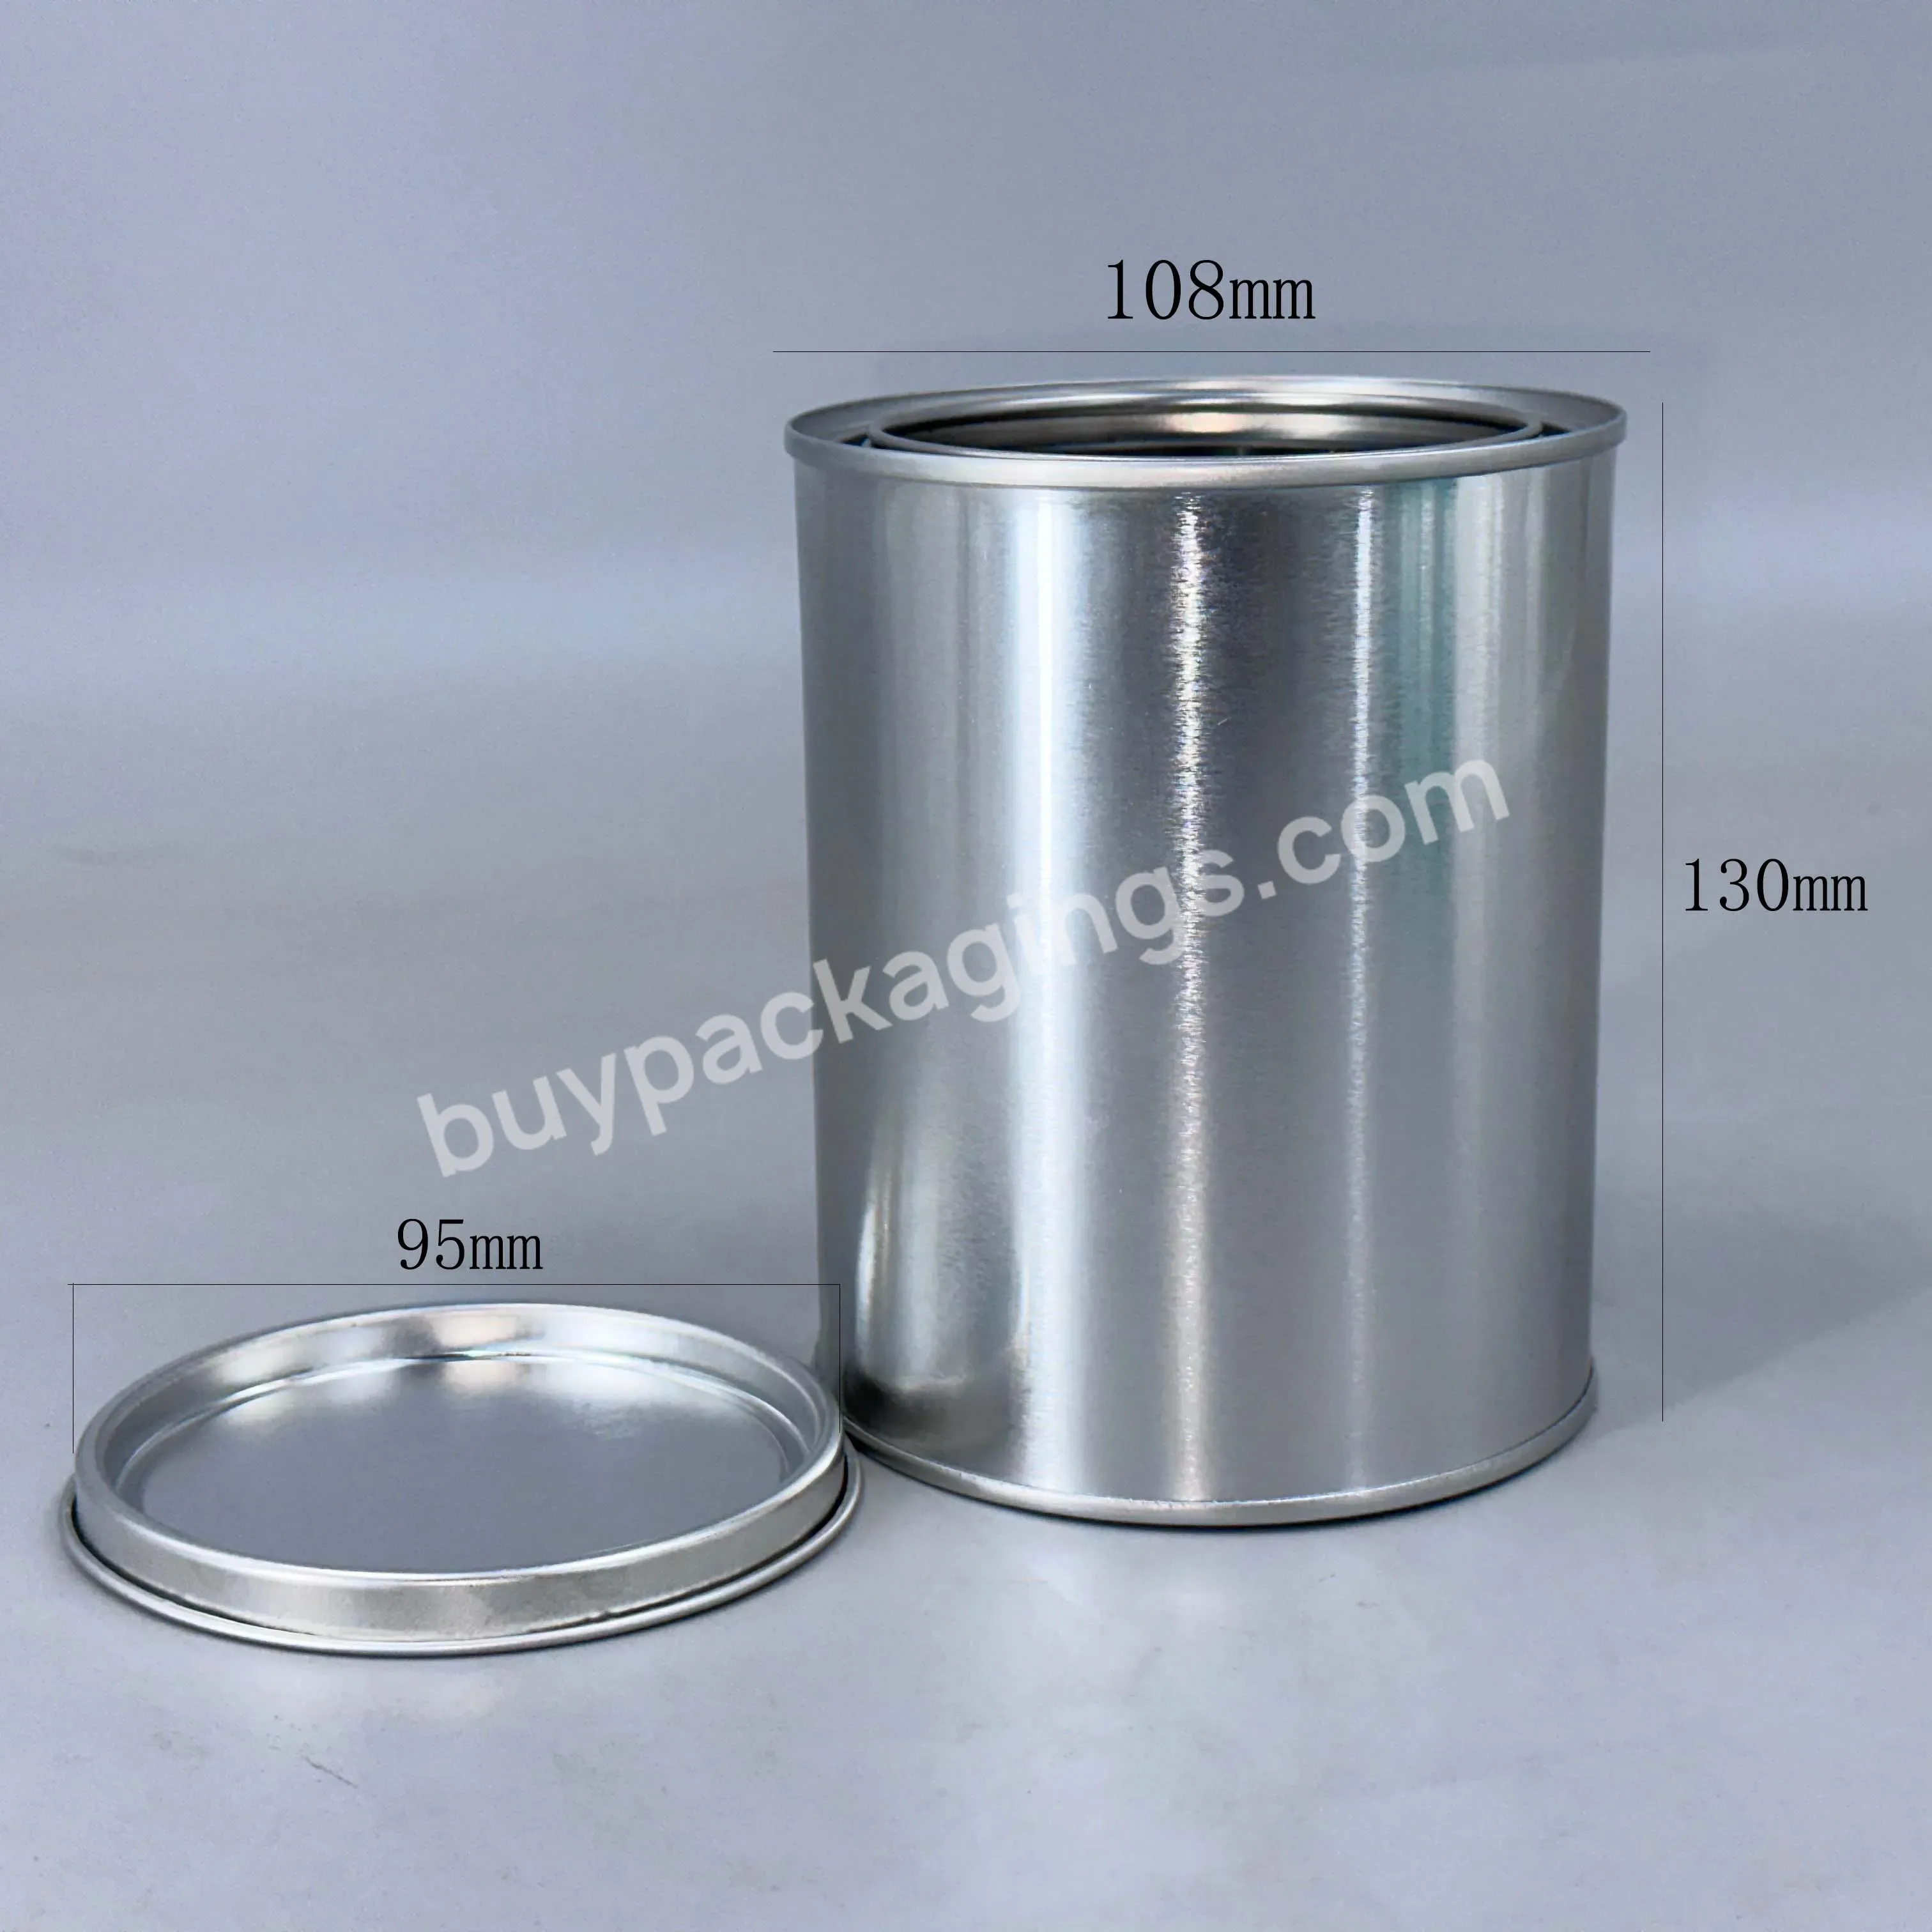 Round Empty General Line Metal Tin Cans Unlined Quart Pint Gallon Sizes